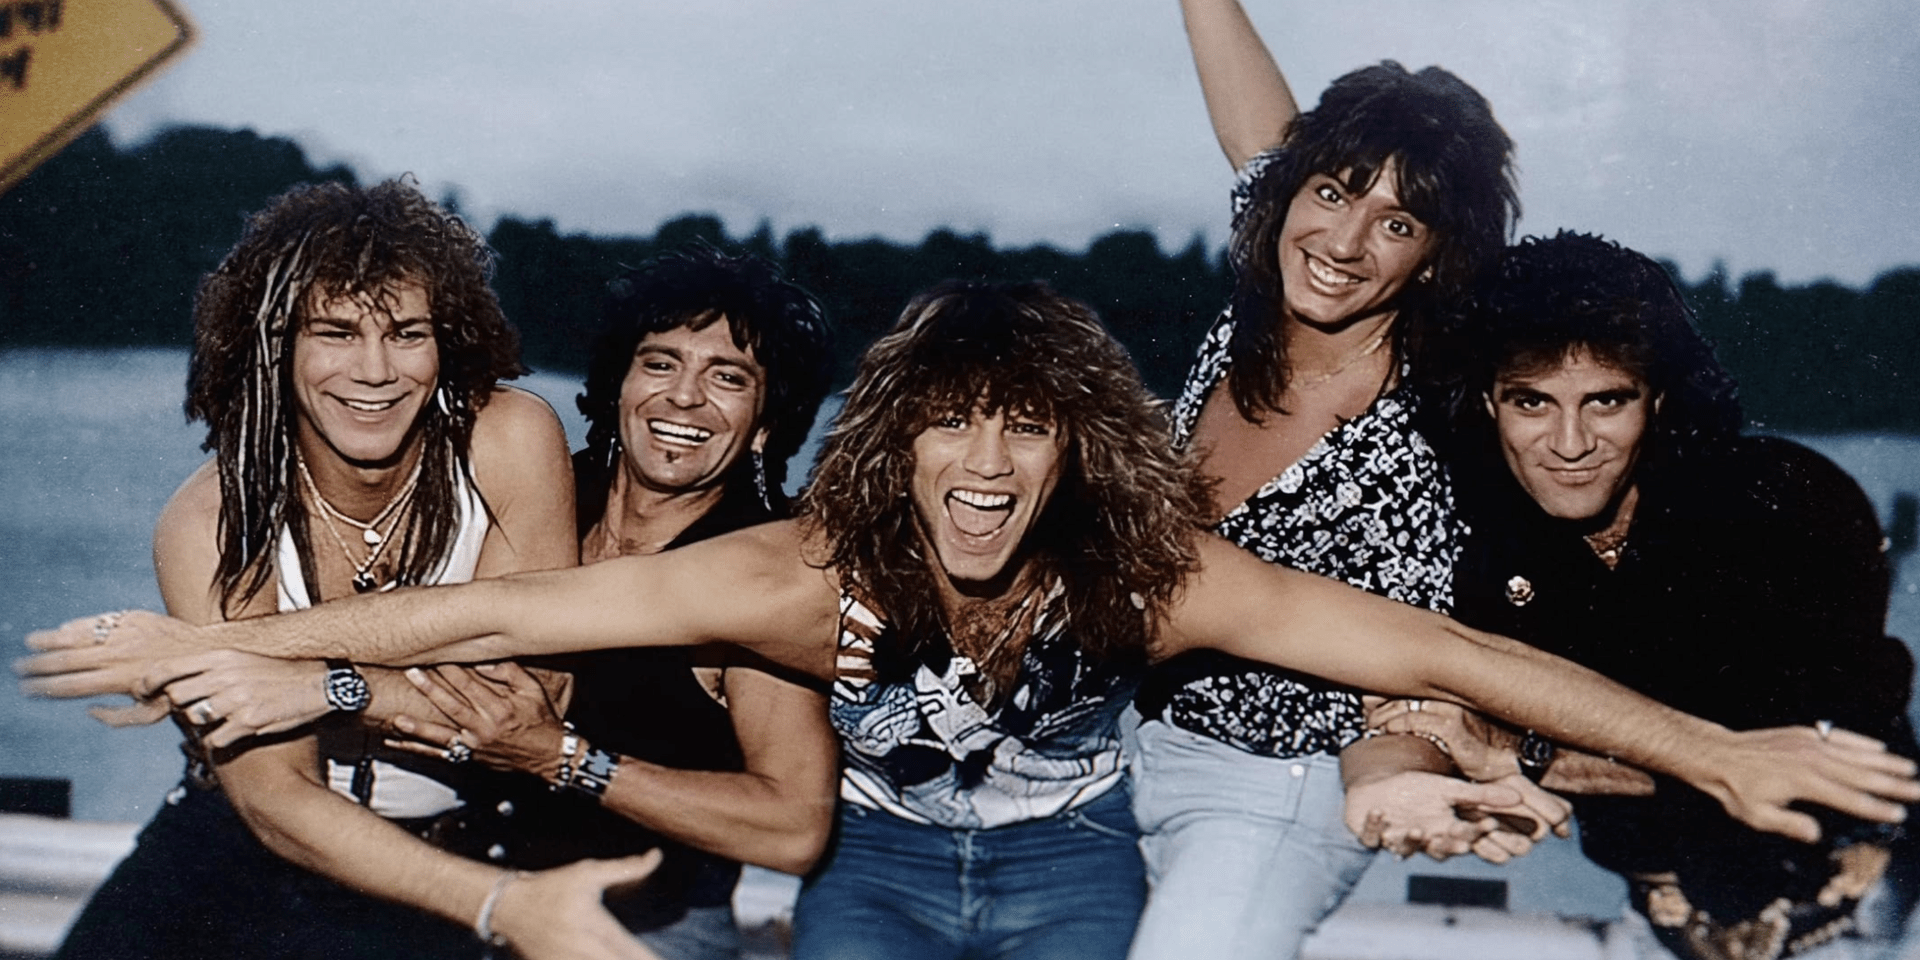 Bon Jovi on a boat in this image from Religion of Sports.